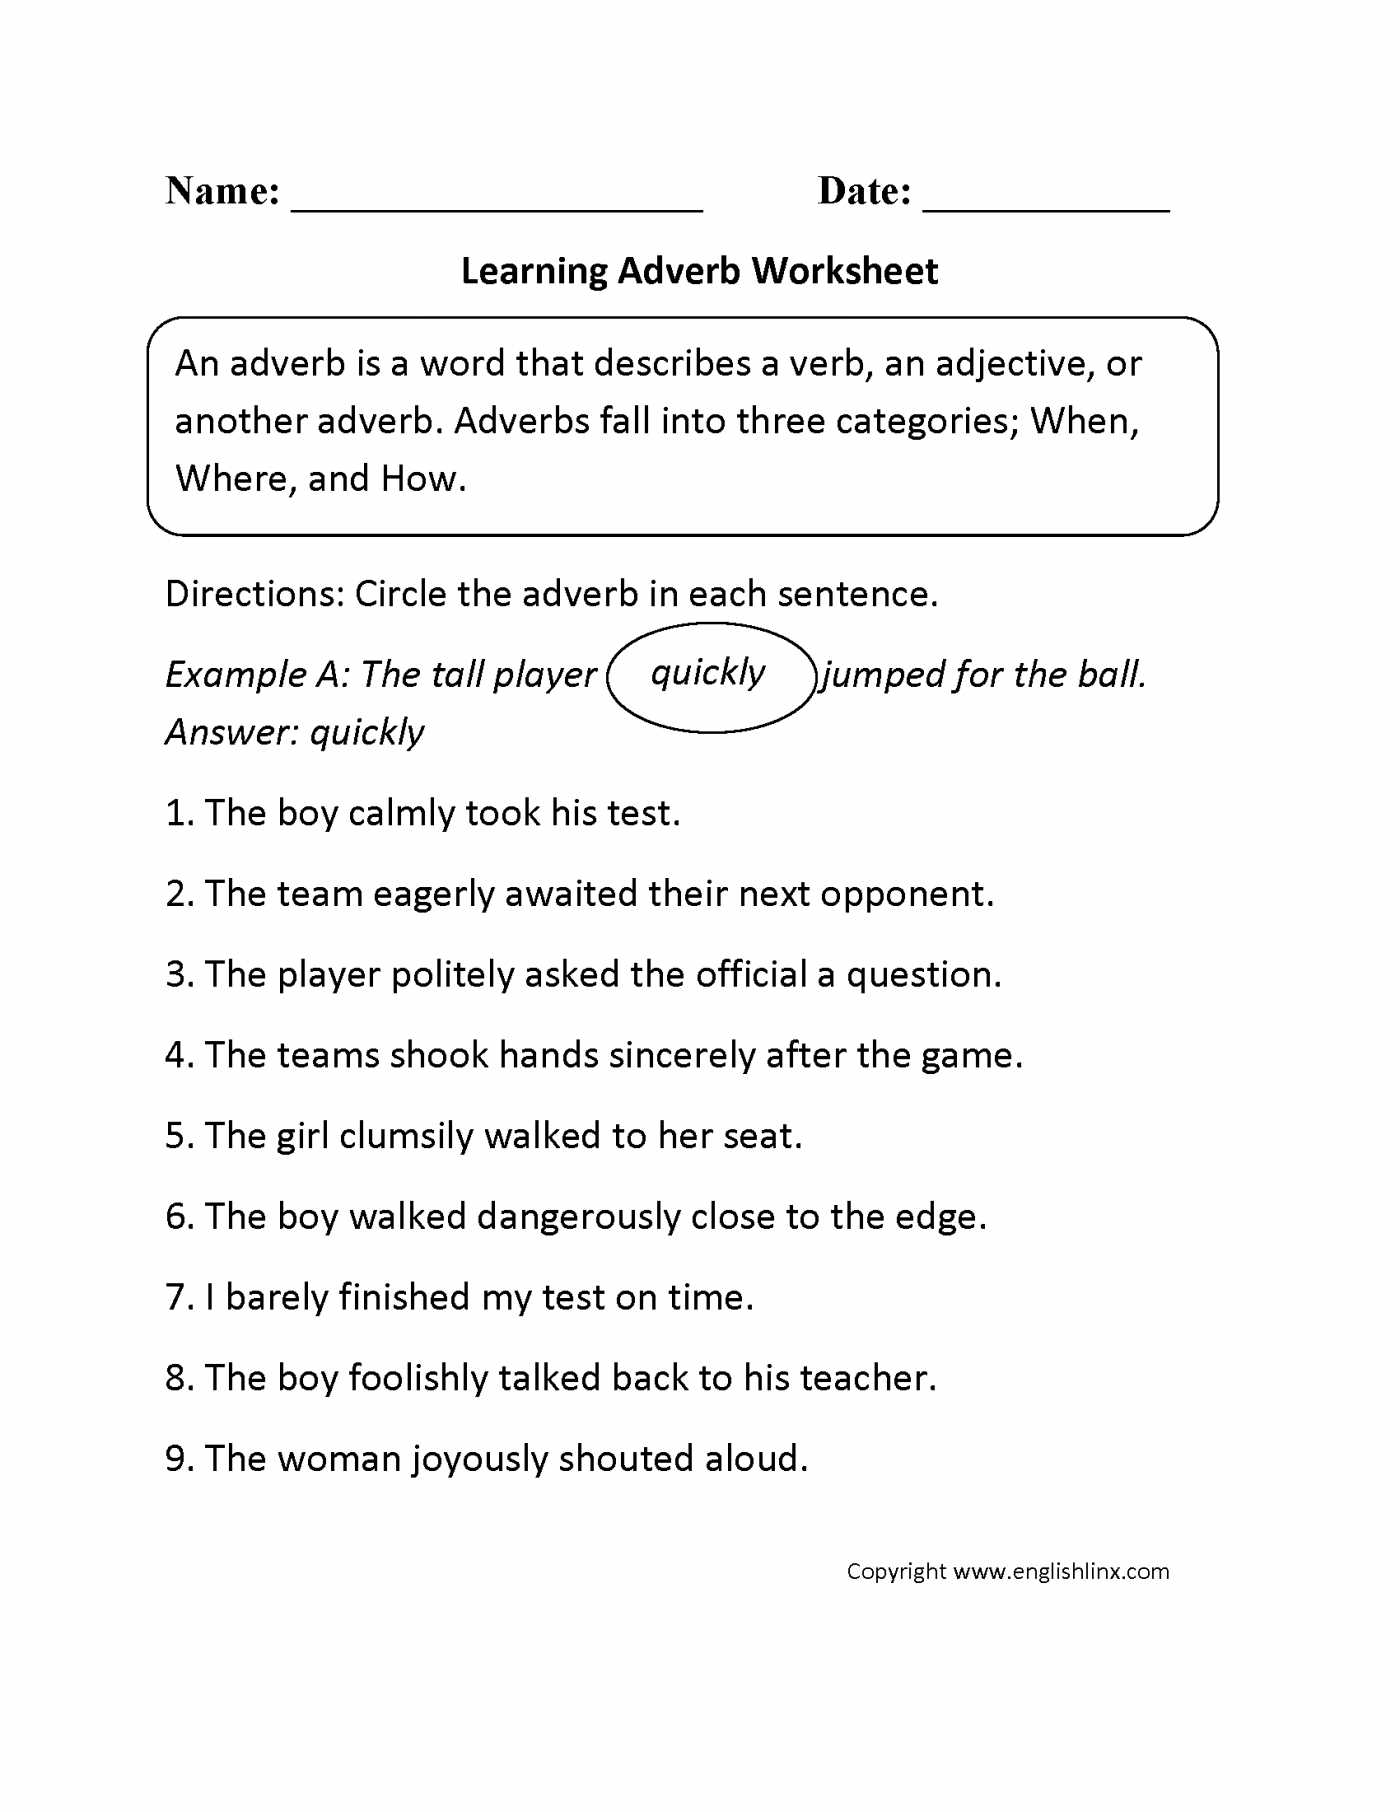 Respect Worksheets Pdf Also Crossword Free Esl Efl Worksheets Made by Teachers for Adverbs